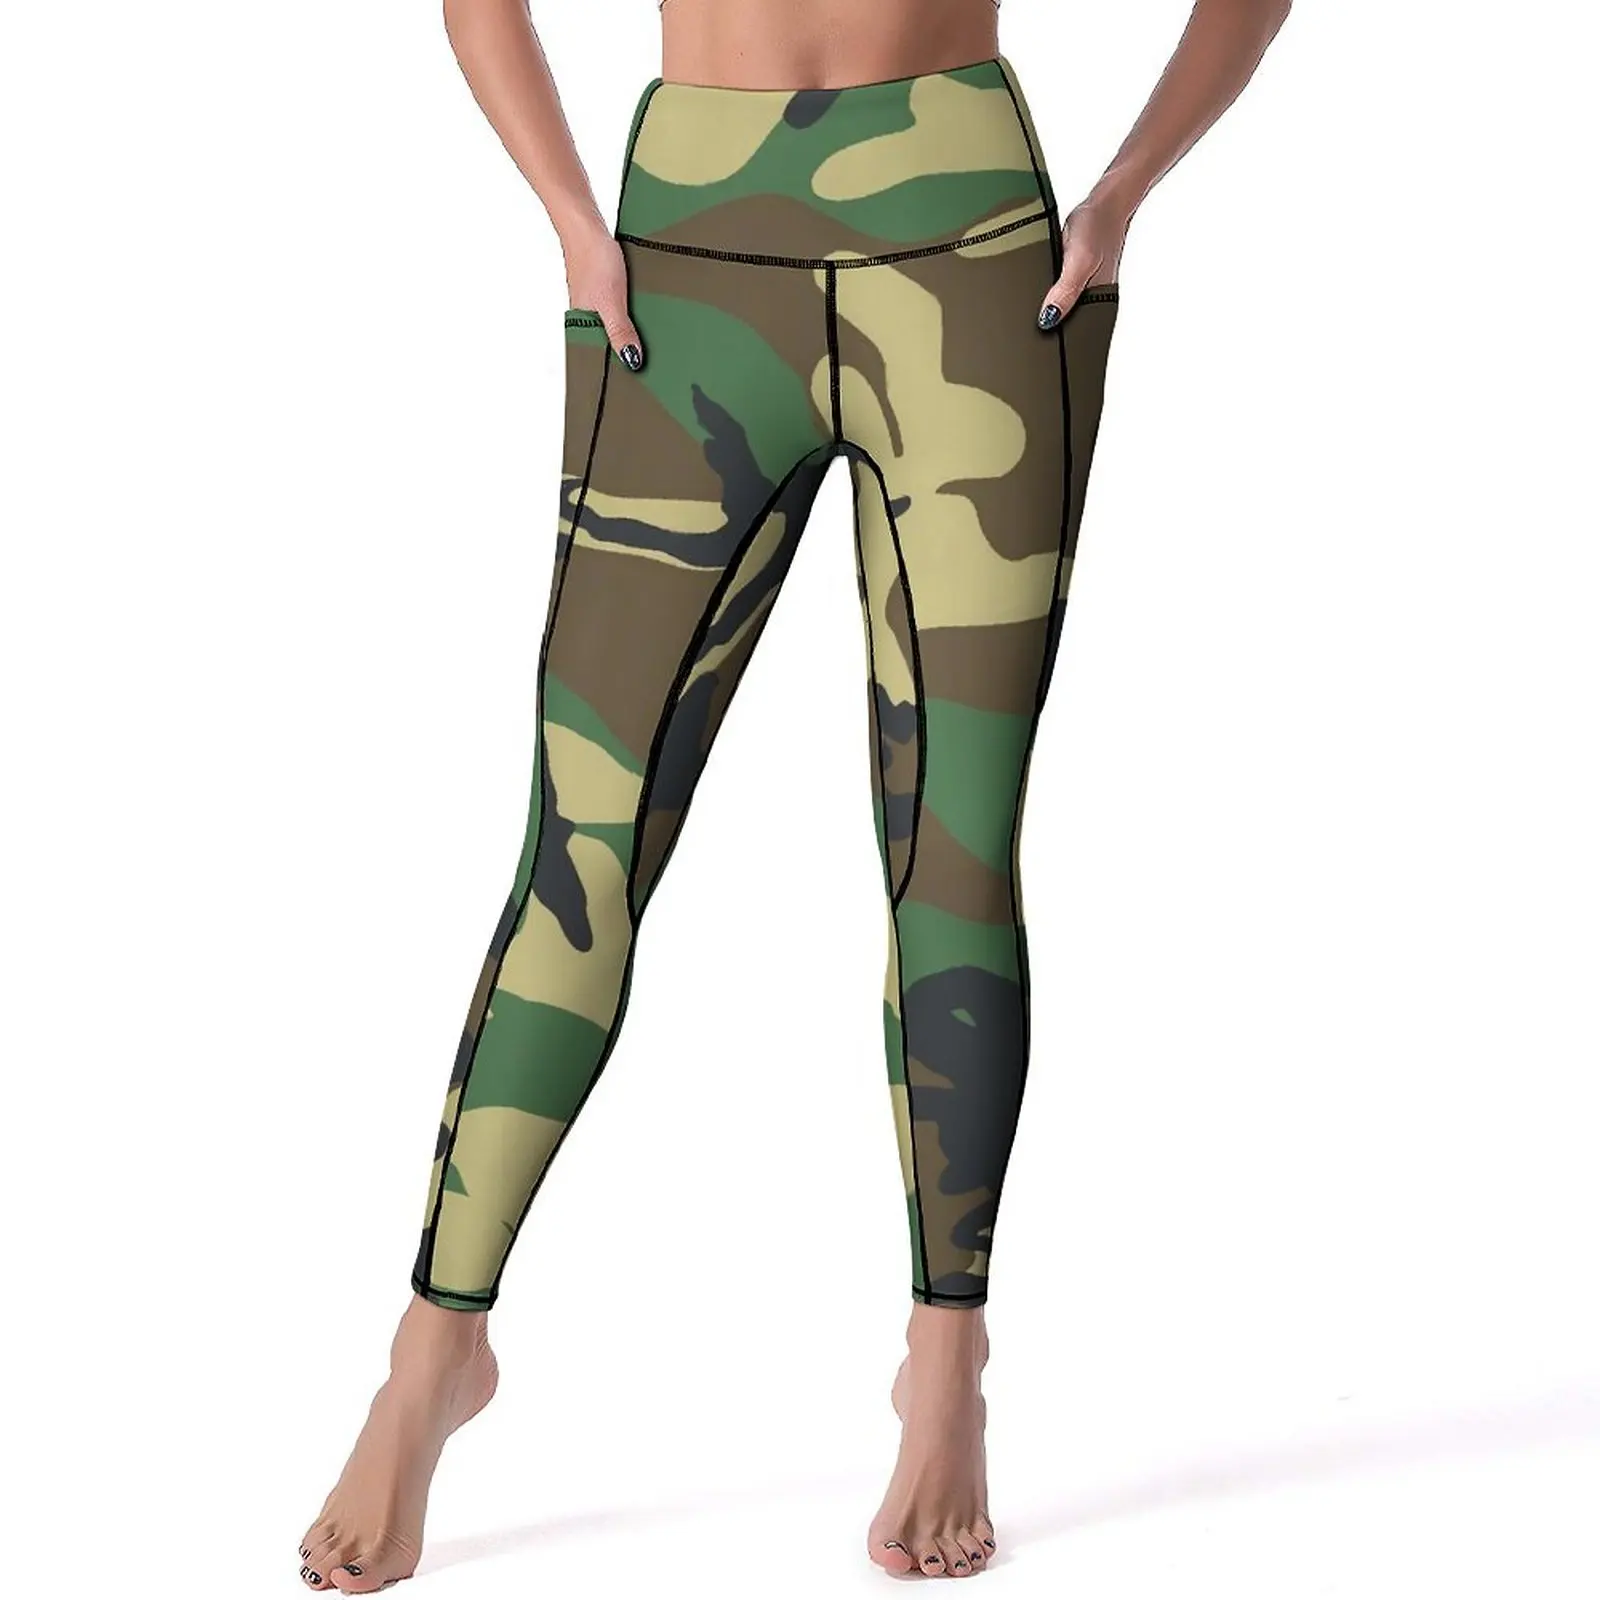 

Woodland Camo Yoga Pants Sexy Green Camouflage Graphic Leggings Push Up Gym Leggins Lady Cute Stretch Sports Tights